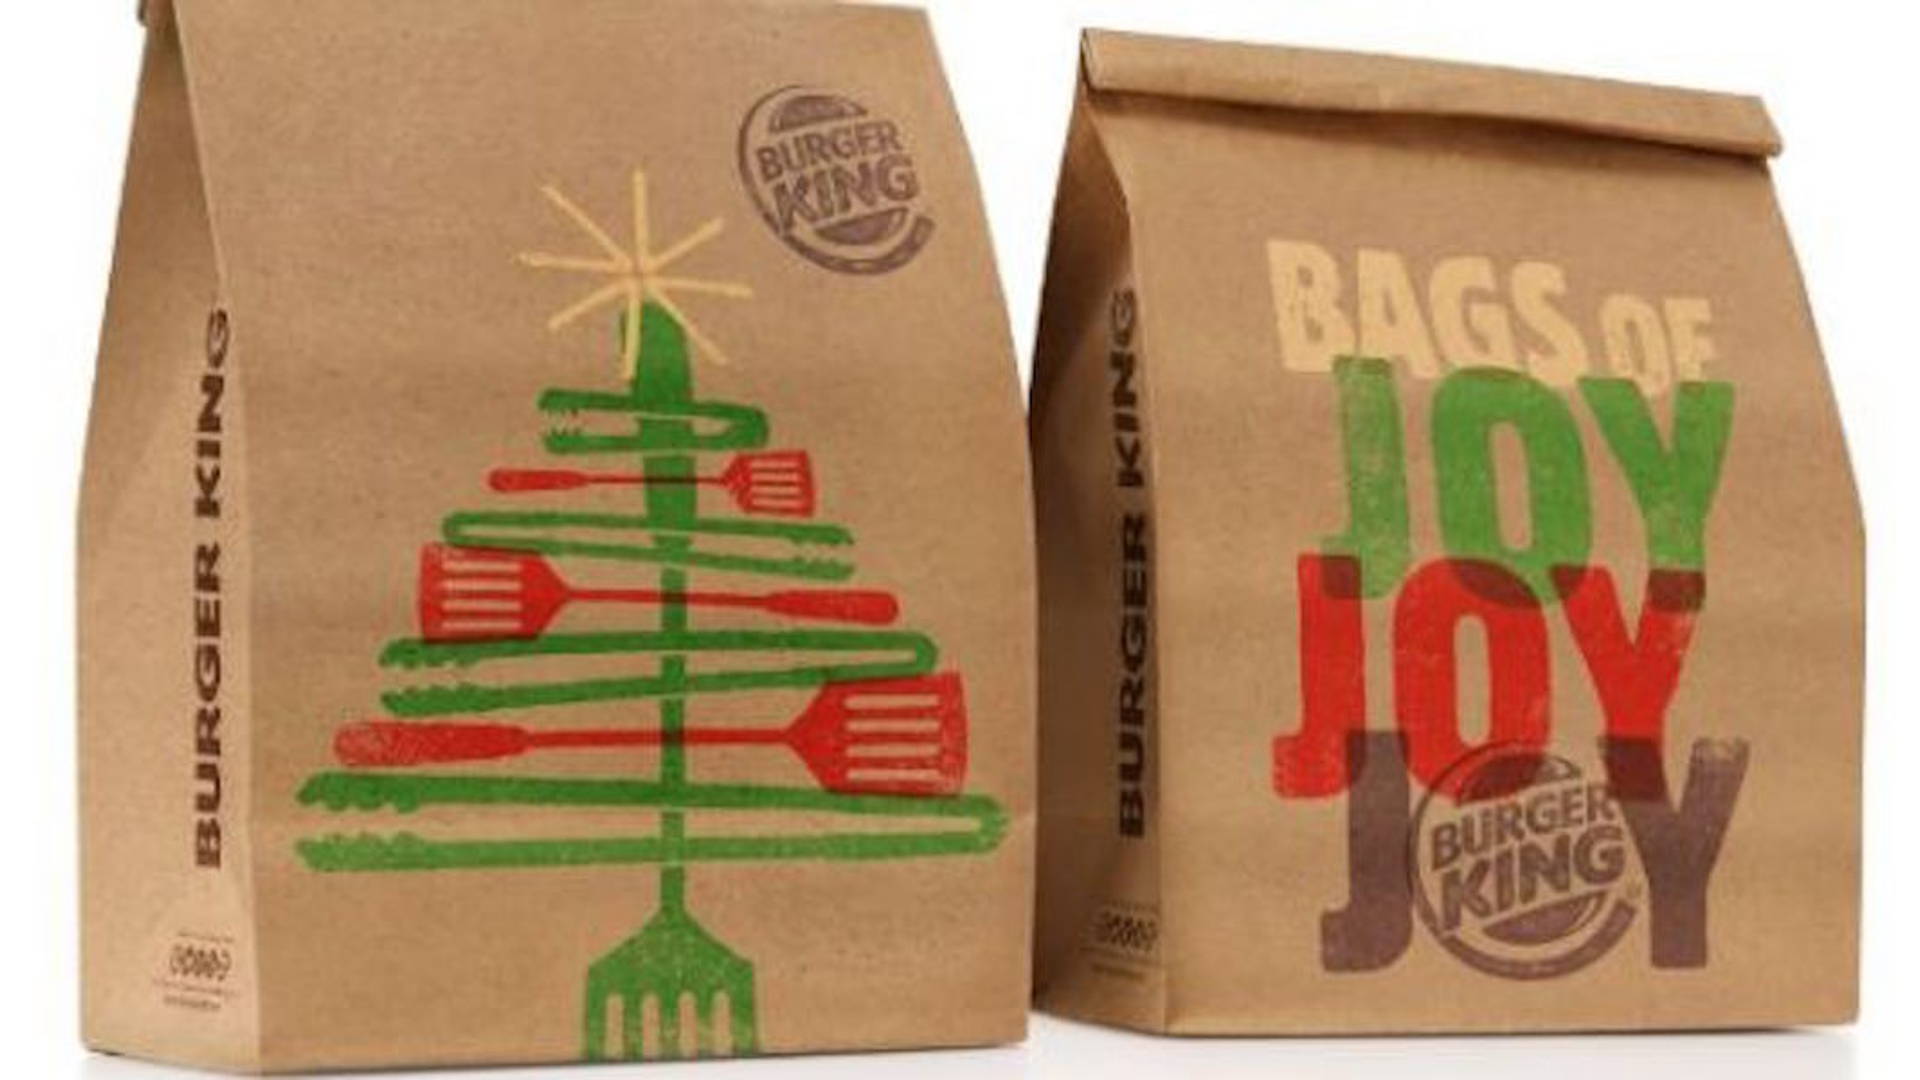 Featured image for Burger King Holiday Packaging